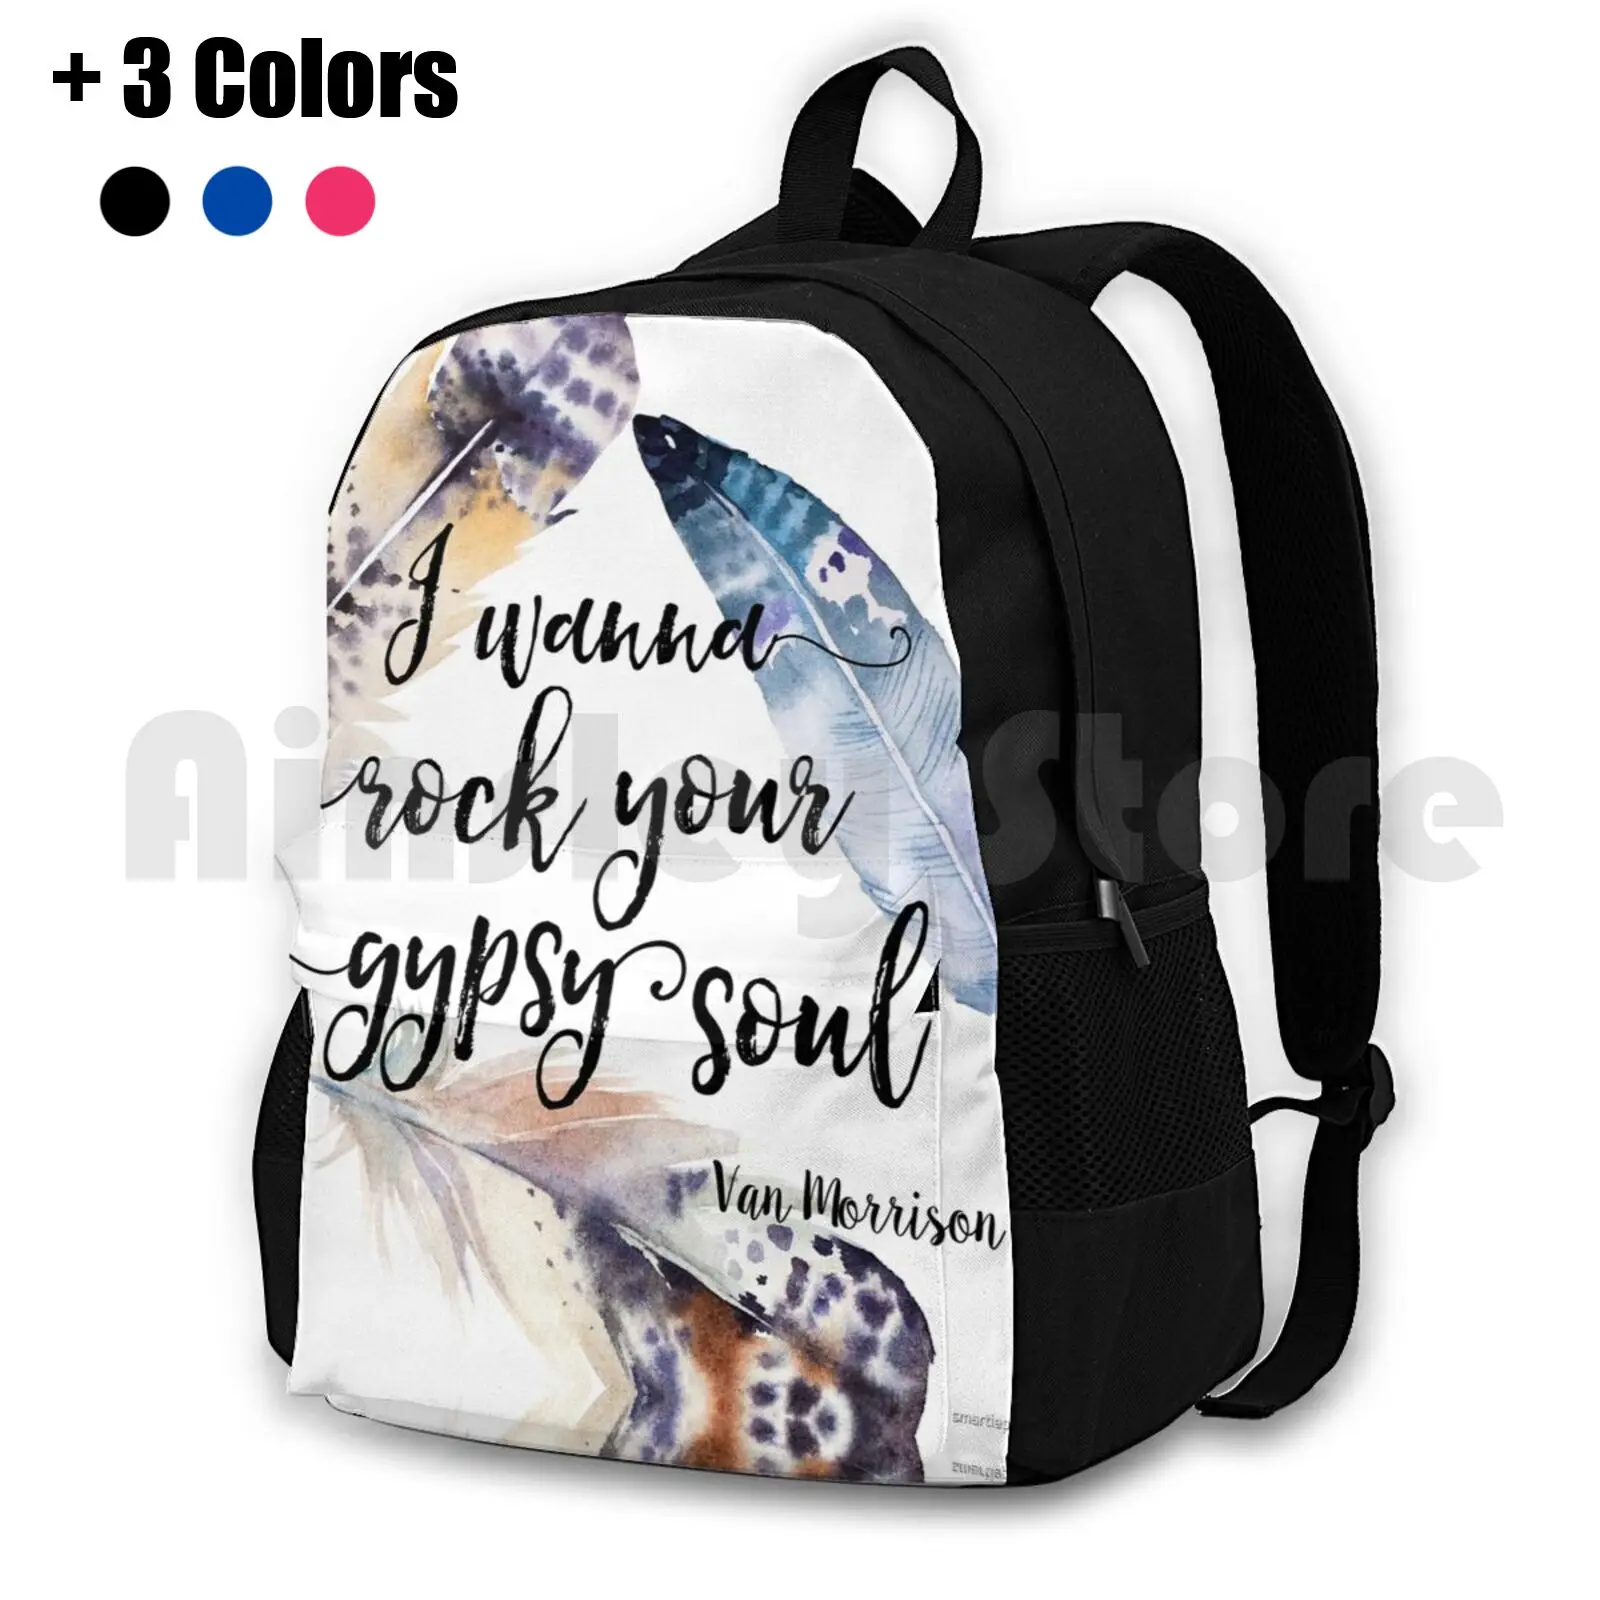 

Gypsy Soul-Into The Mystic Lyrics Outdoor Hiking Backpack Waterproof Camping Travel Van Morrison Into The Mystic Feathers Gypsy